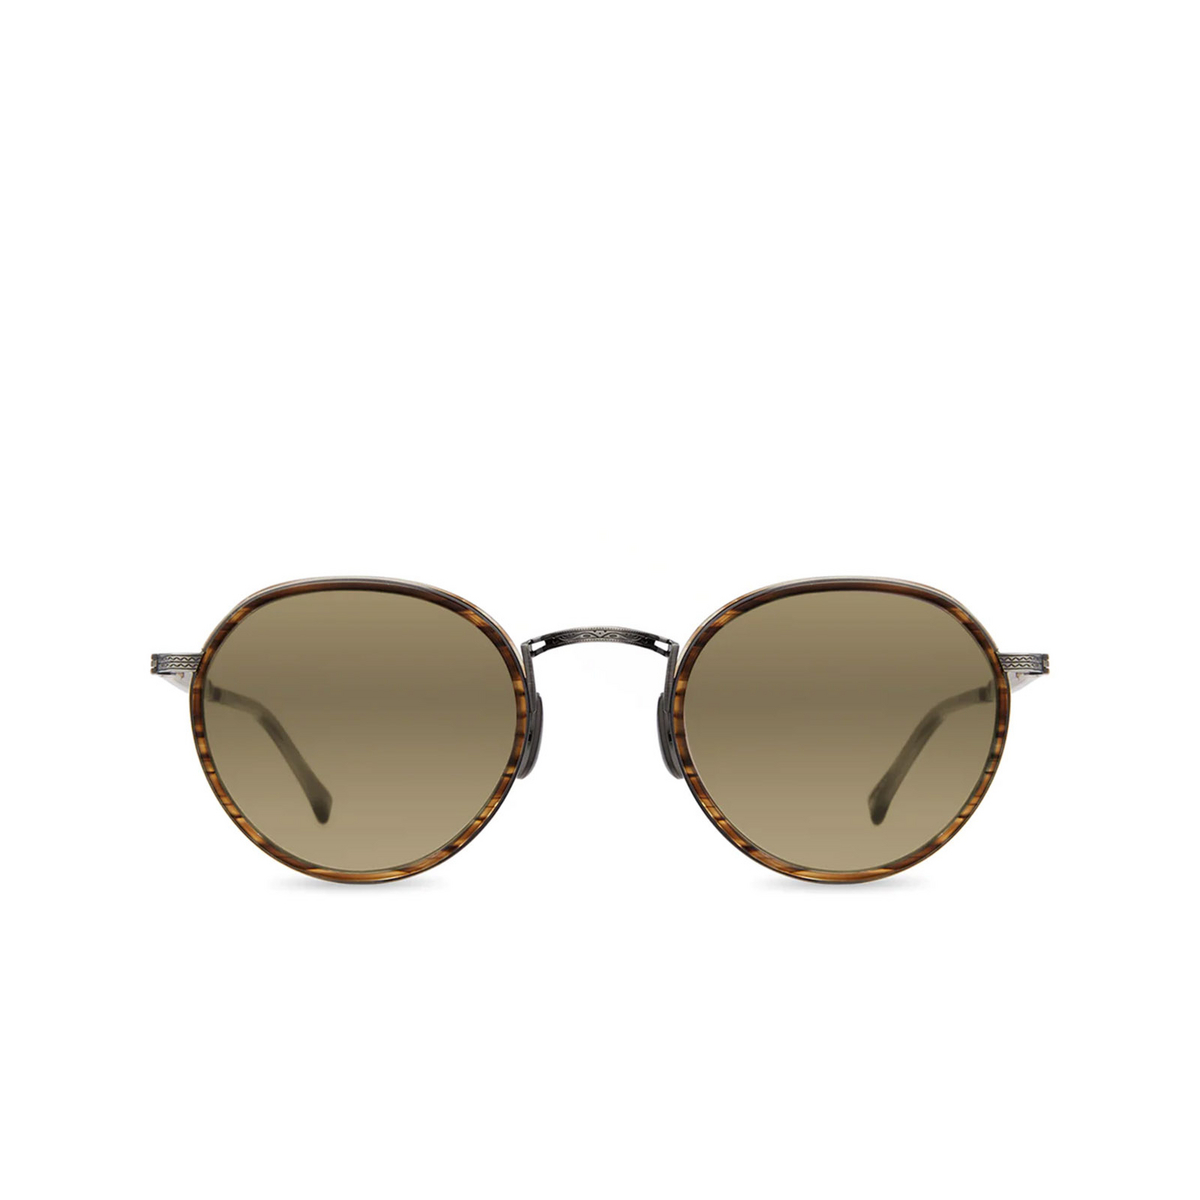 Mr. Leight BILLIE S Sunglasses DRFTWD-PW/SMKY Driftwood-Pewter - front view